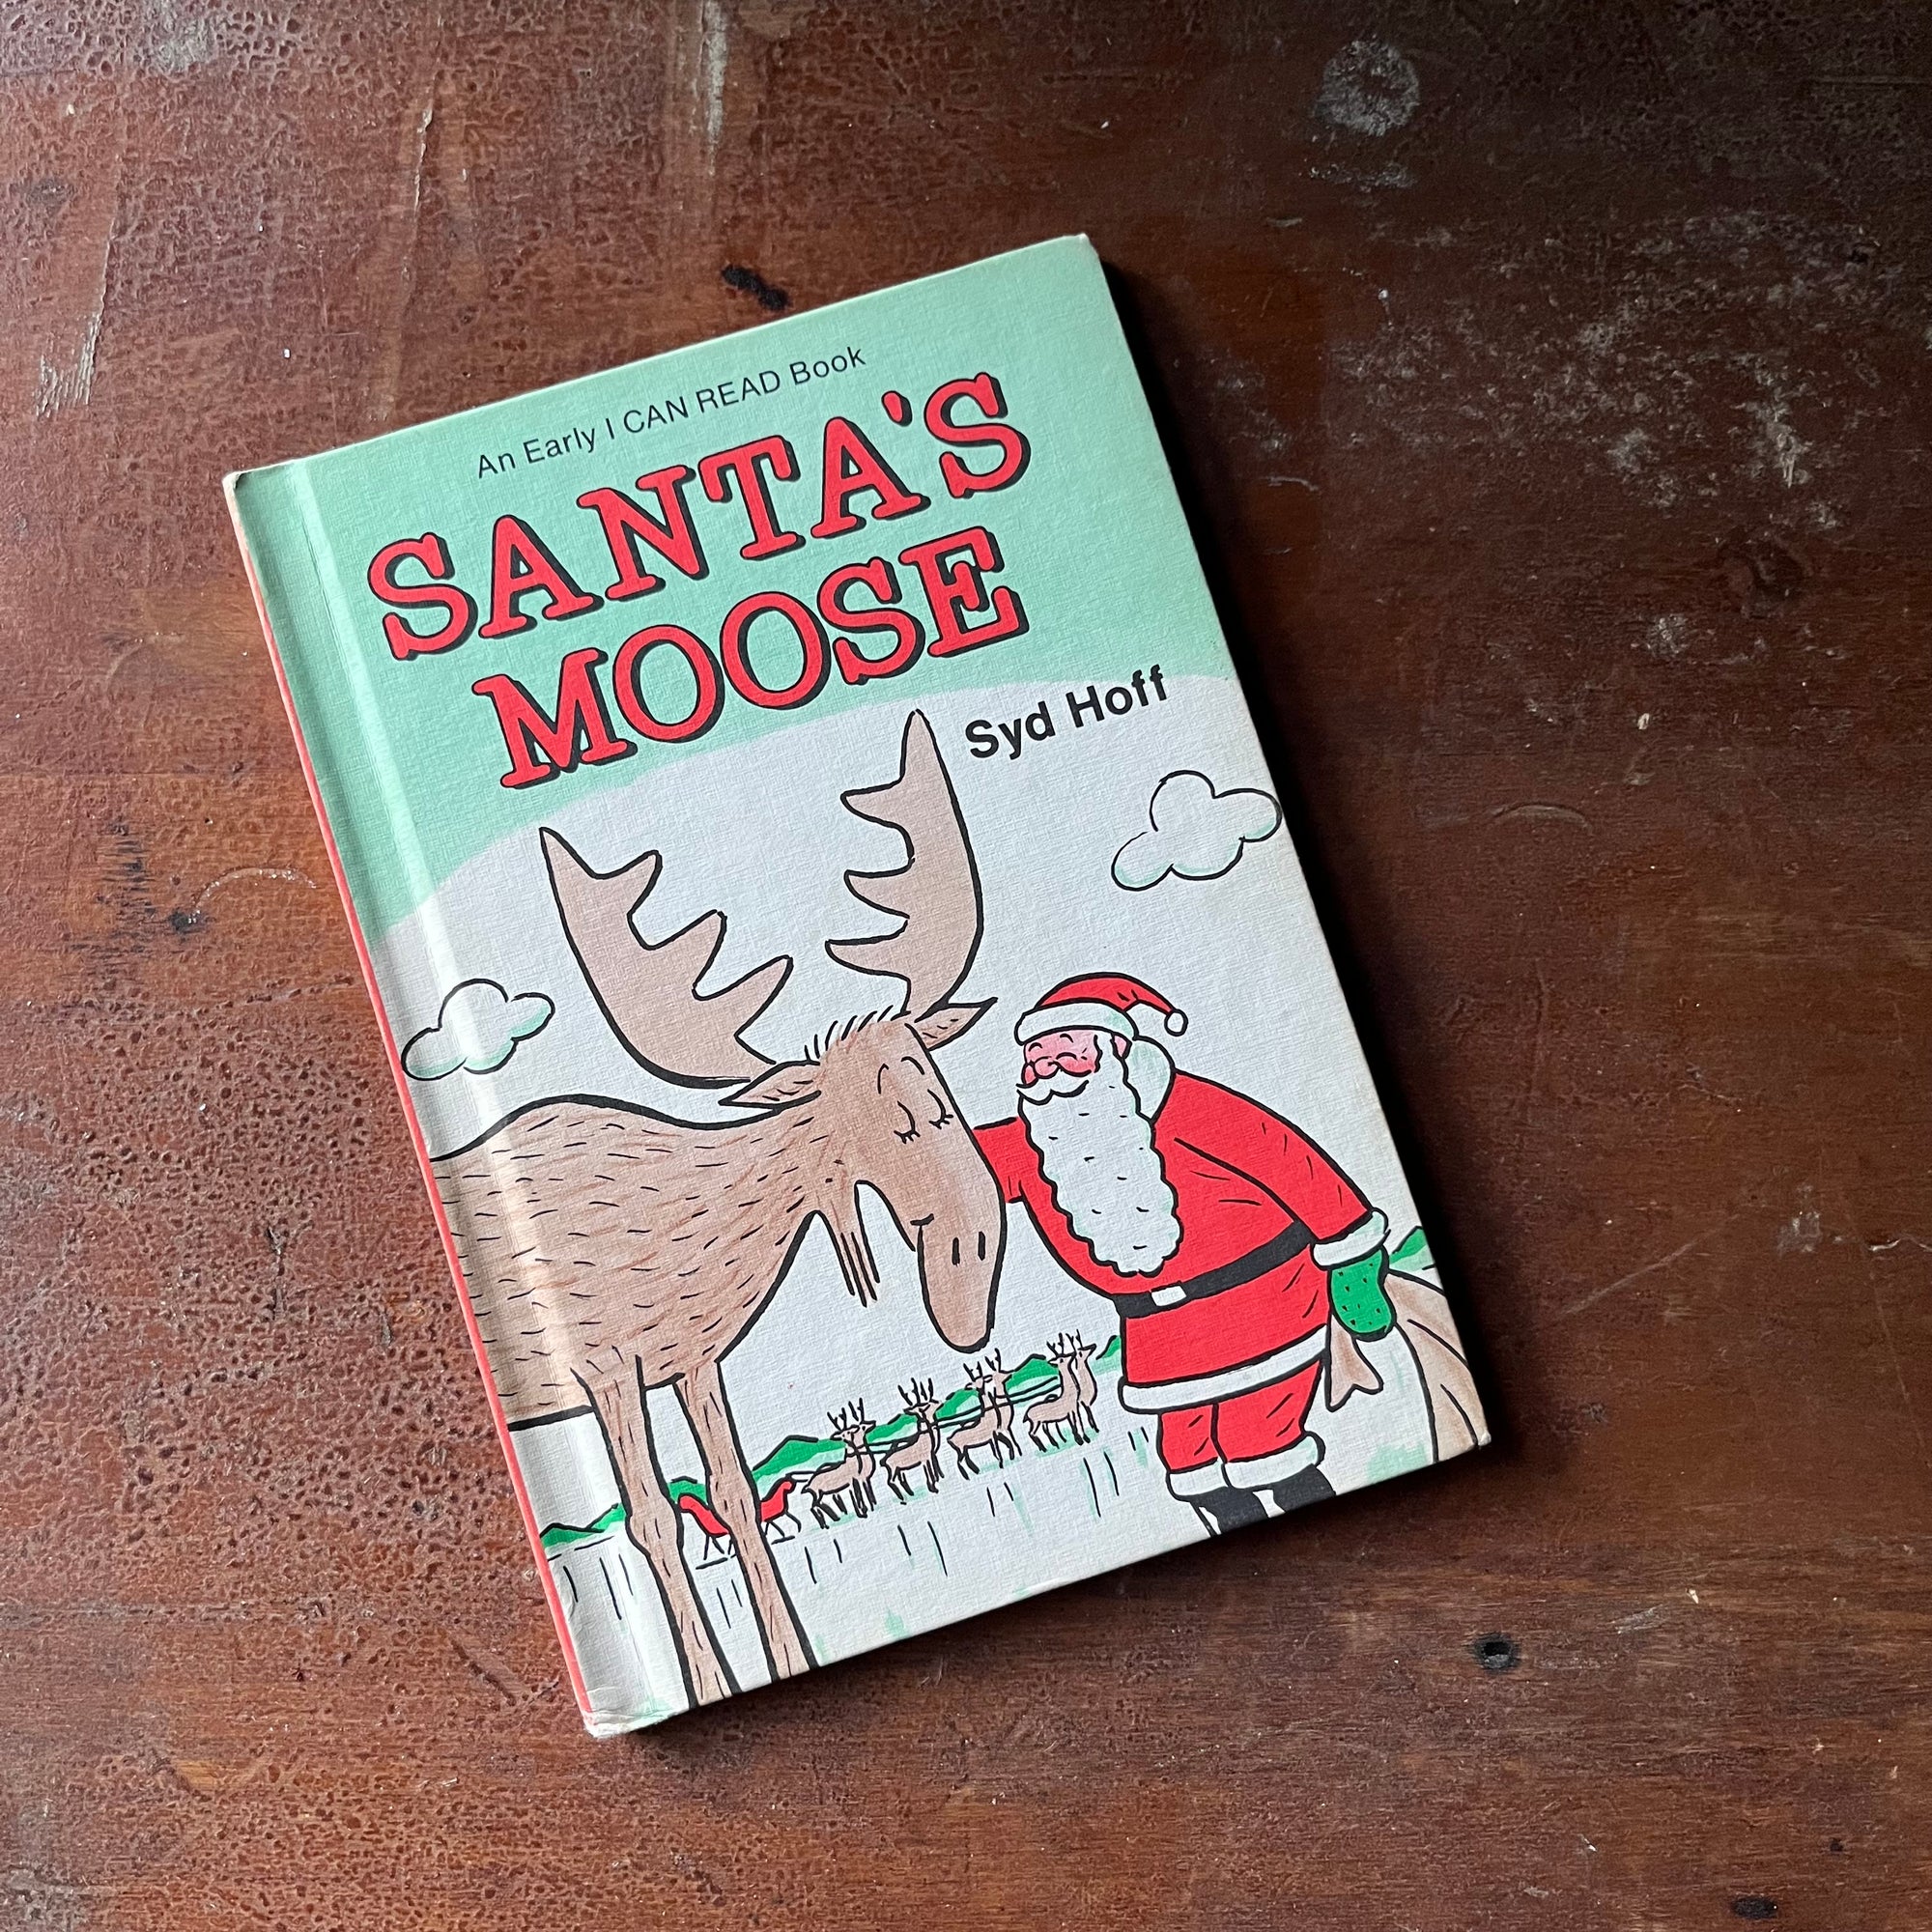 vintage children's picture book - Weekly Reader Books Presents Santa Moose, An Early I Can Read Book written & illustrated by Syd Hoff - view of the front cover with an illustration of Santa with the Moose (santa's reindeer are shown in the background)